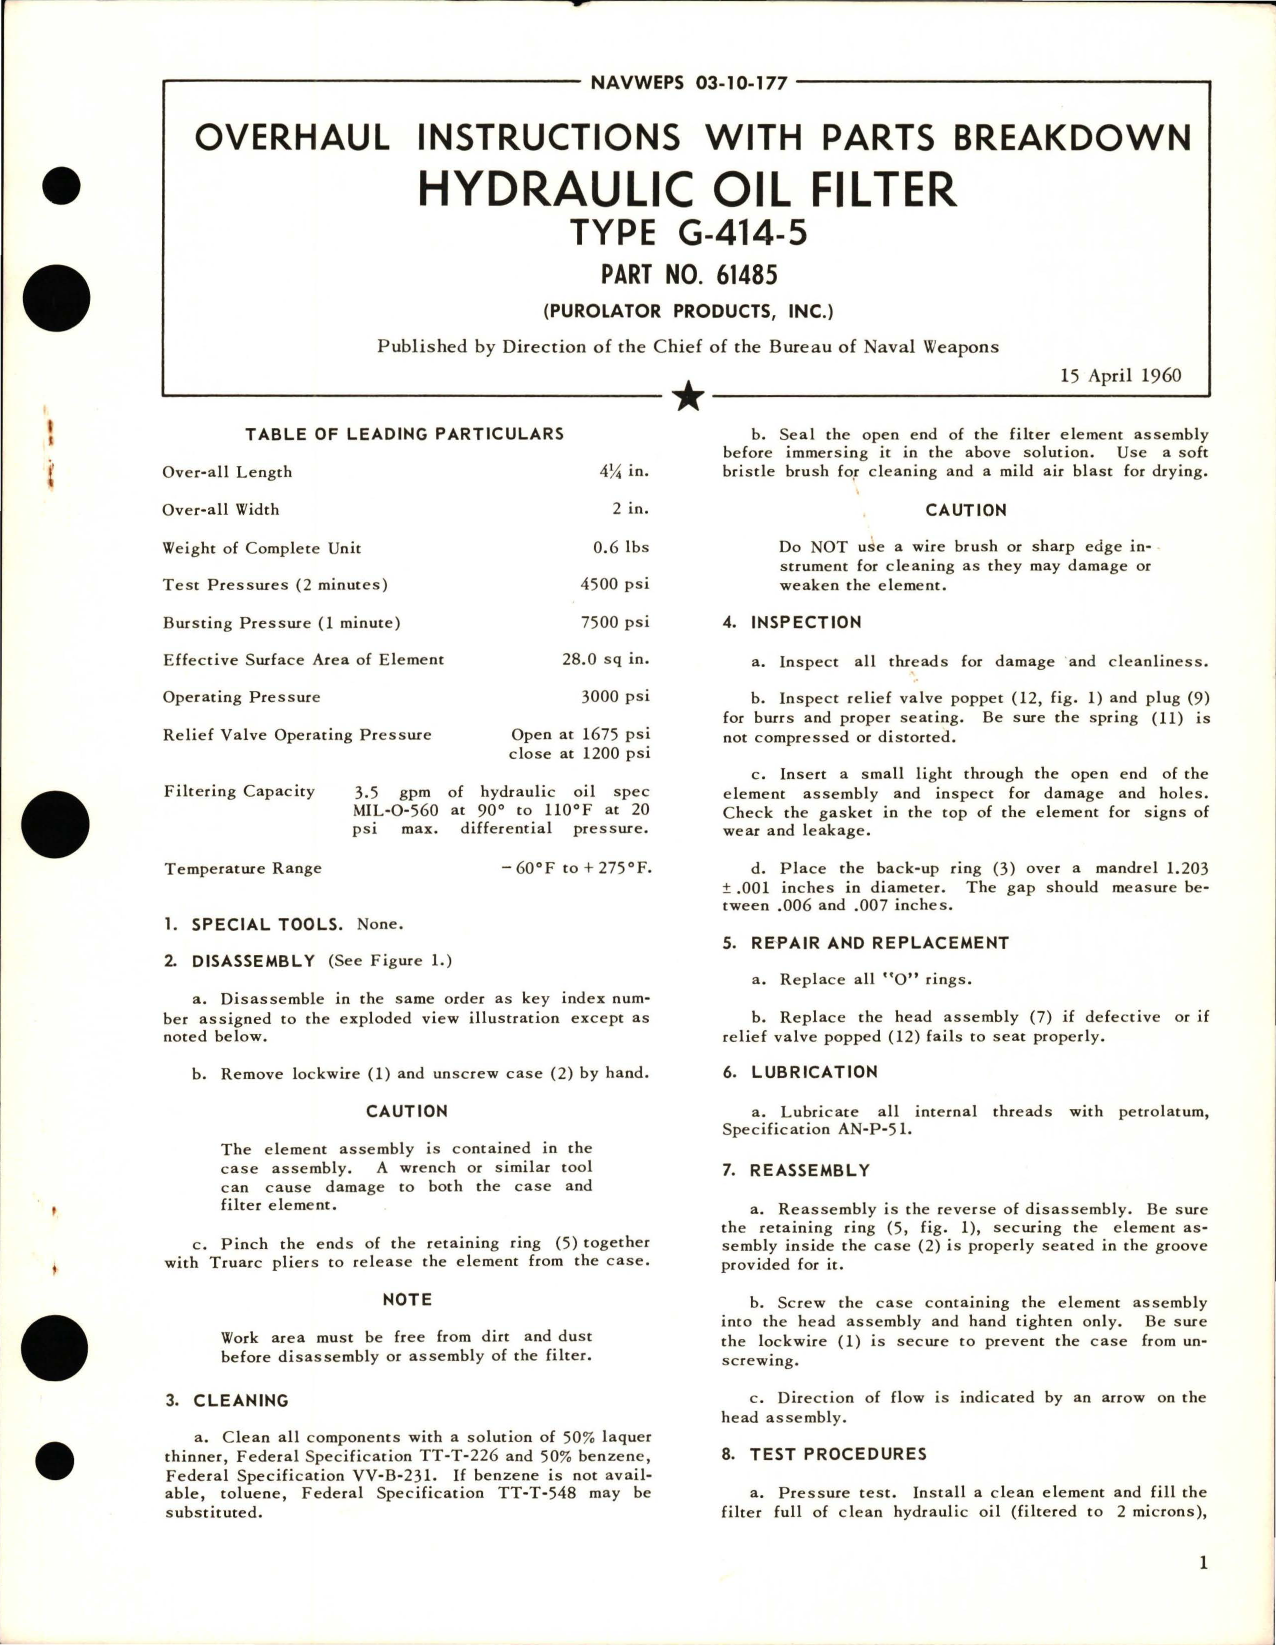 Sample page 1 from AirCorps Library document: Overhaul Instructions with Parts Breakdown for Hydraulic Oil Filter - Type G-414-5 - Part 61485